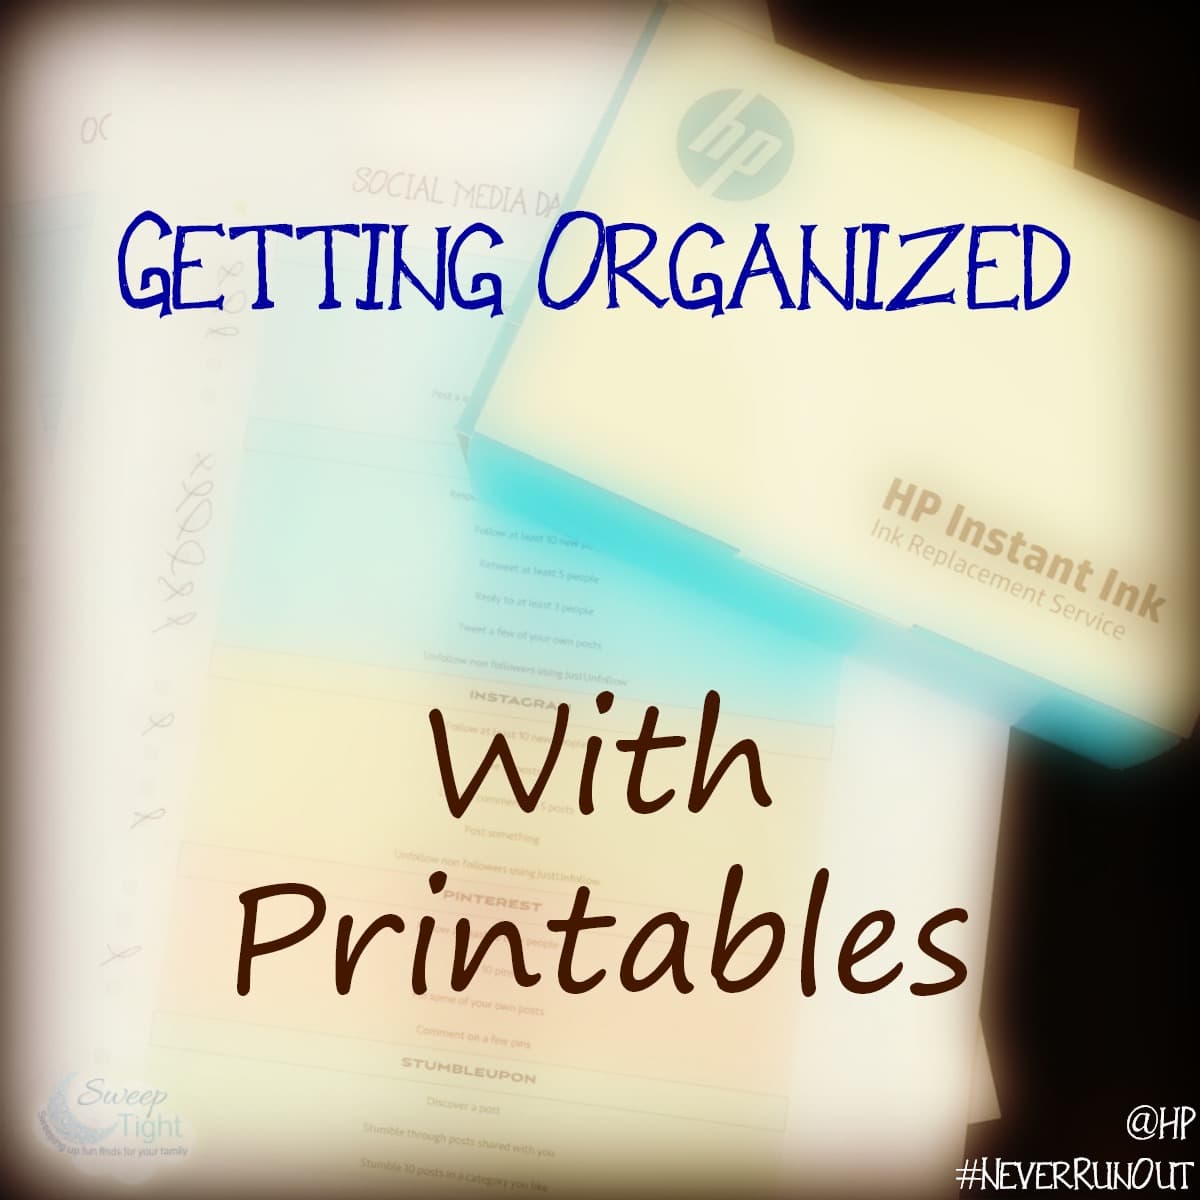 hp-instant-ink-is-helping-me-get-organized-free-printables-sweep-tight